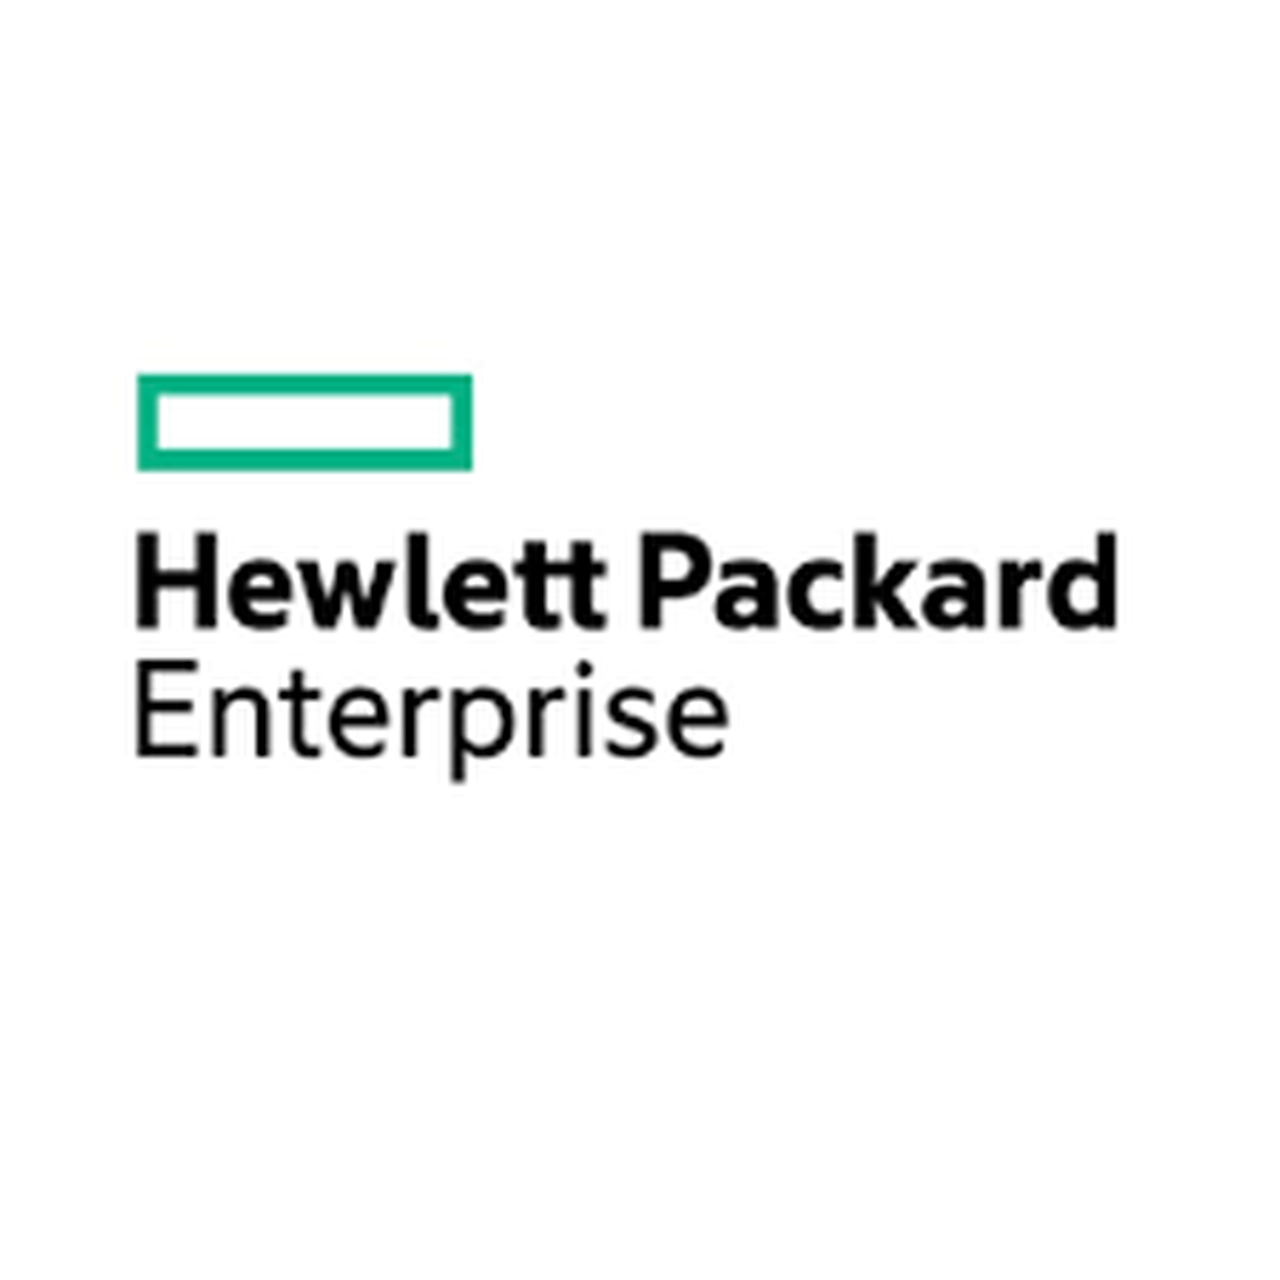 HPE 1 Year Post Warranty Proactive Care, 24x7 wDMR BL460cG6 Service